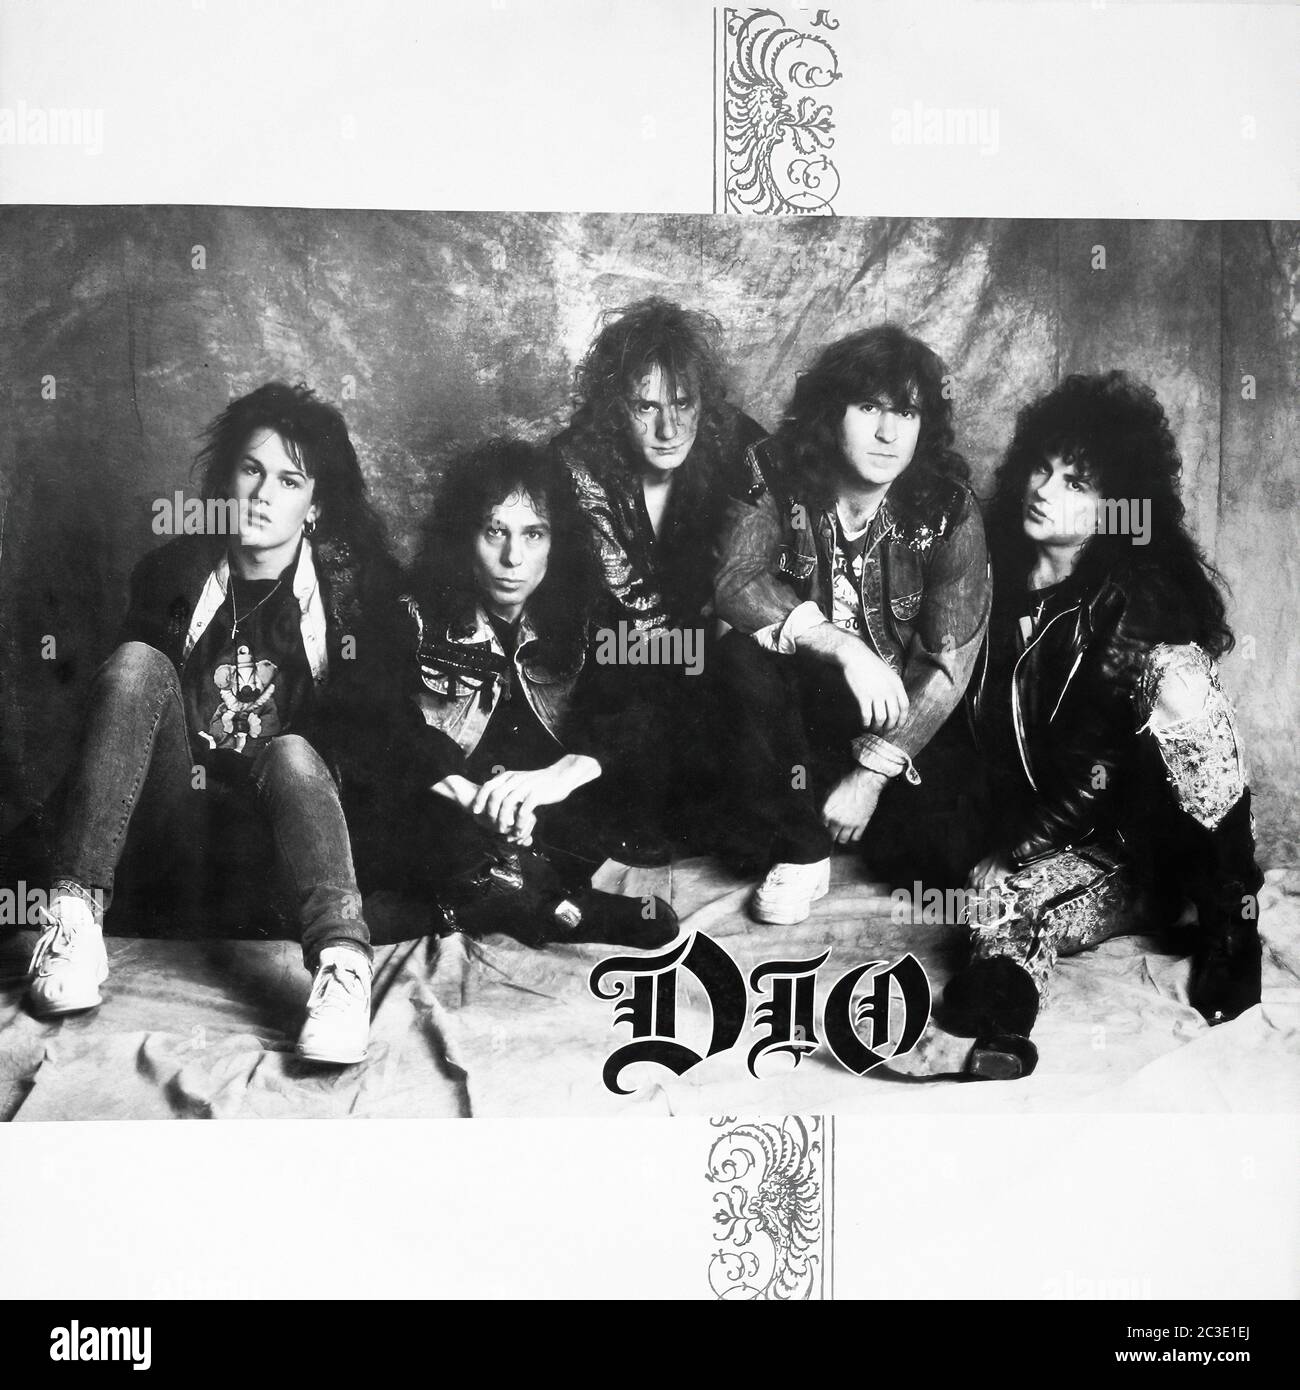 DIO Lock Up The Wolves - Vintage 12'' vinyl LP 02 Cover Stock Photo - Alamy